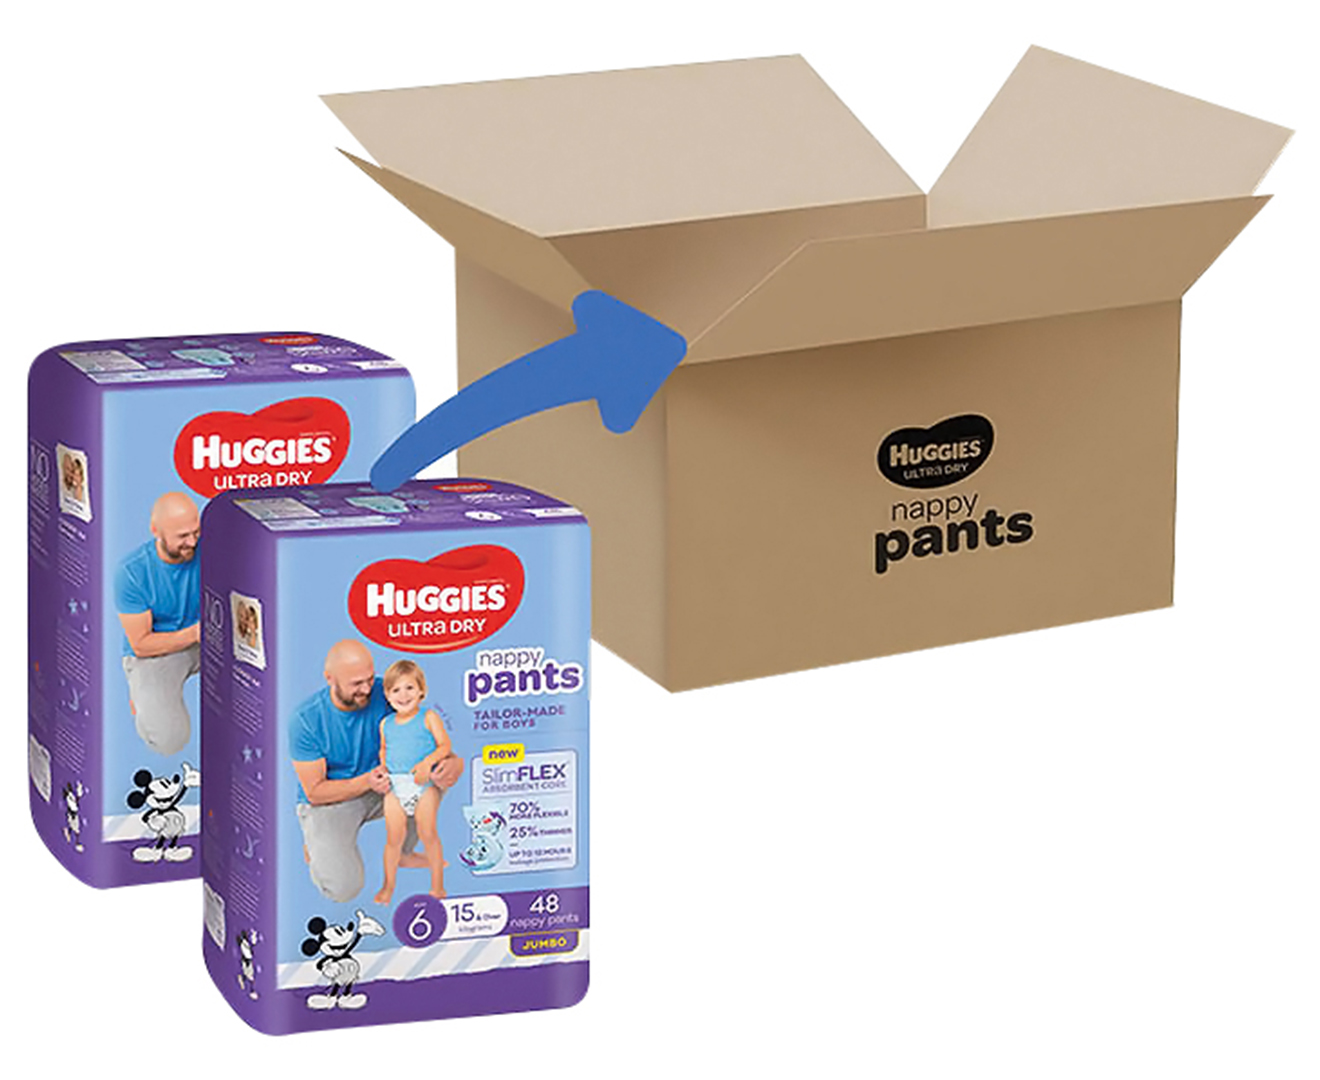 Huggies Ultra Dry Nappy Pants Girls Size 6 (15kg+) 96 Count (2 x